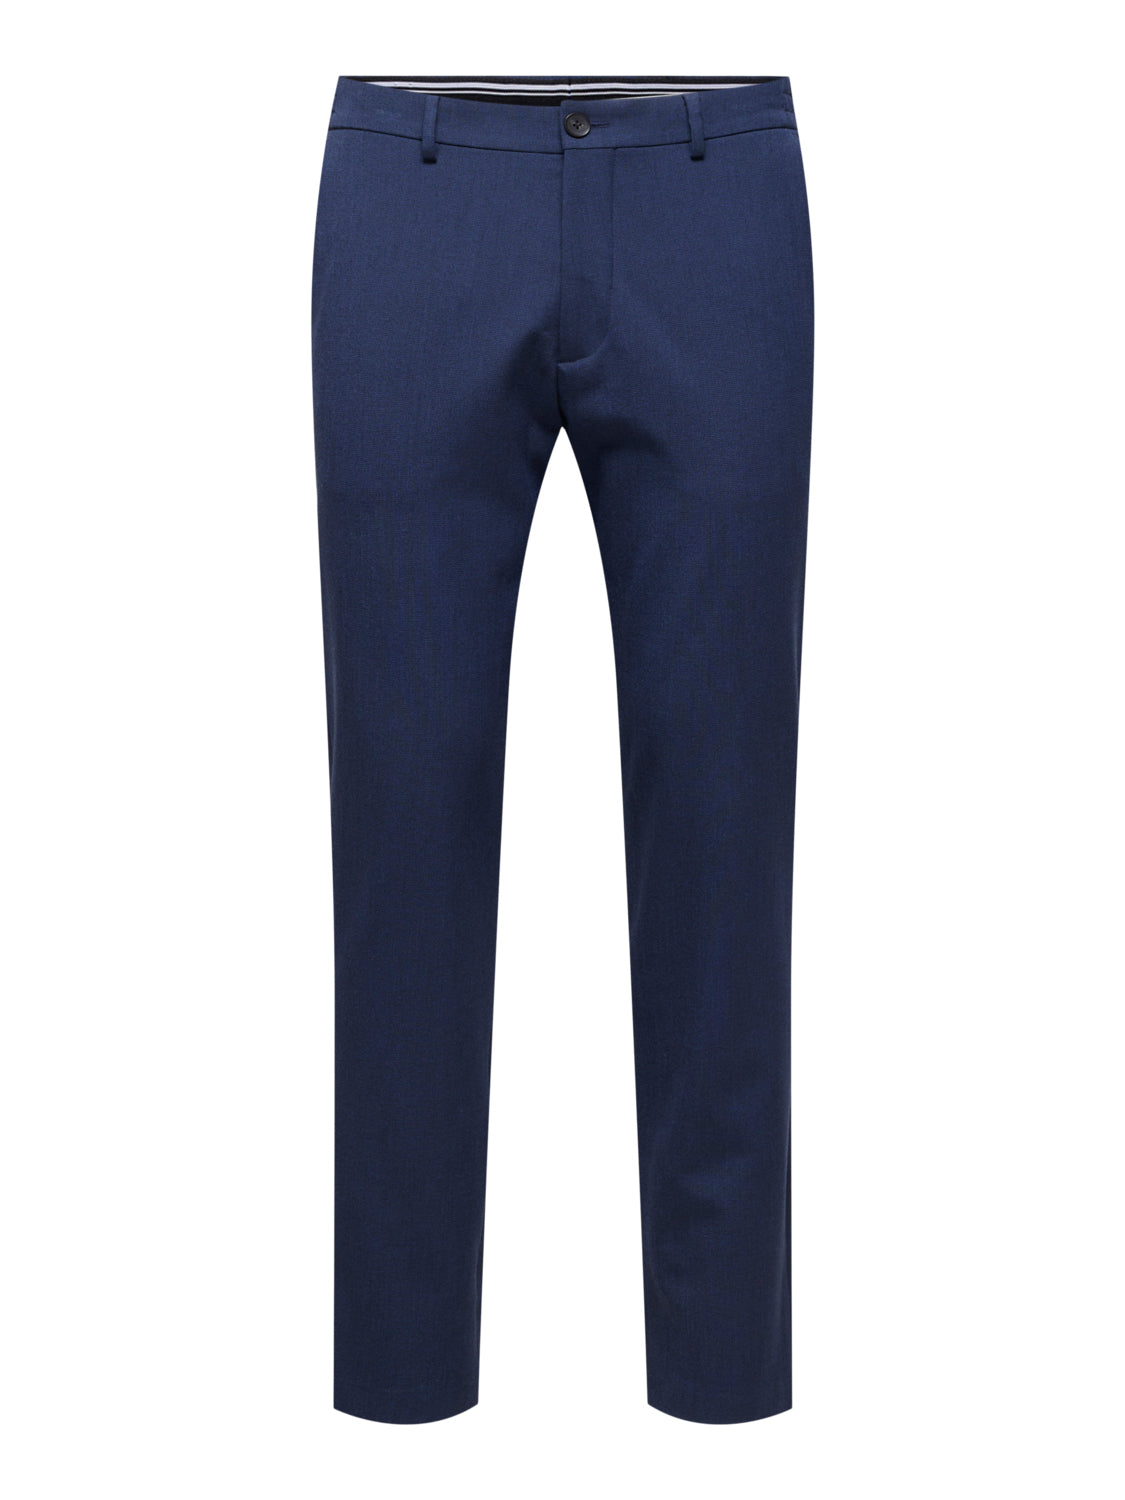 SELECTED HOMME - SLIM-DAVE Pants - Blue Sapphire